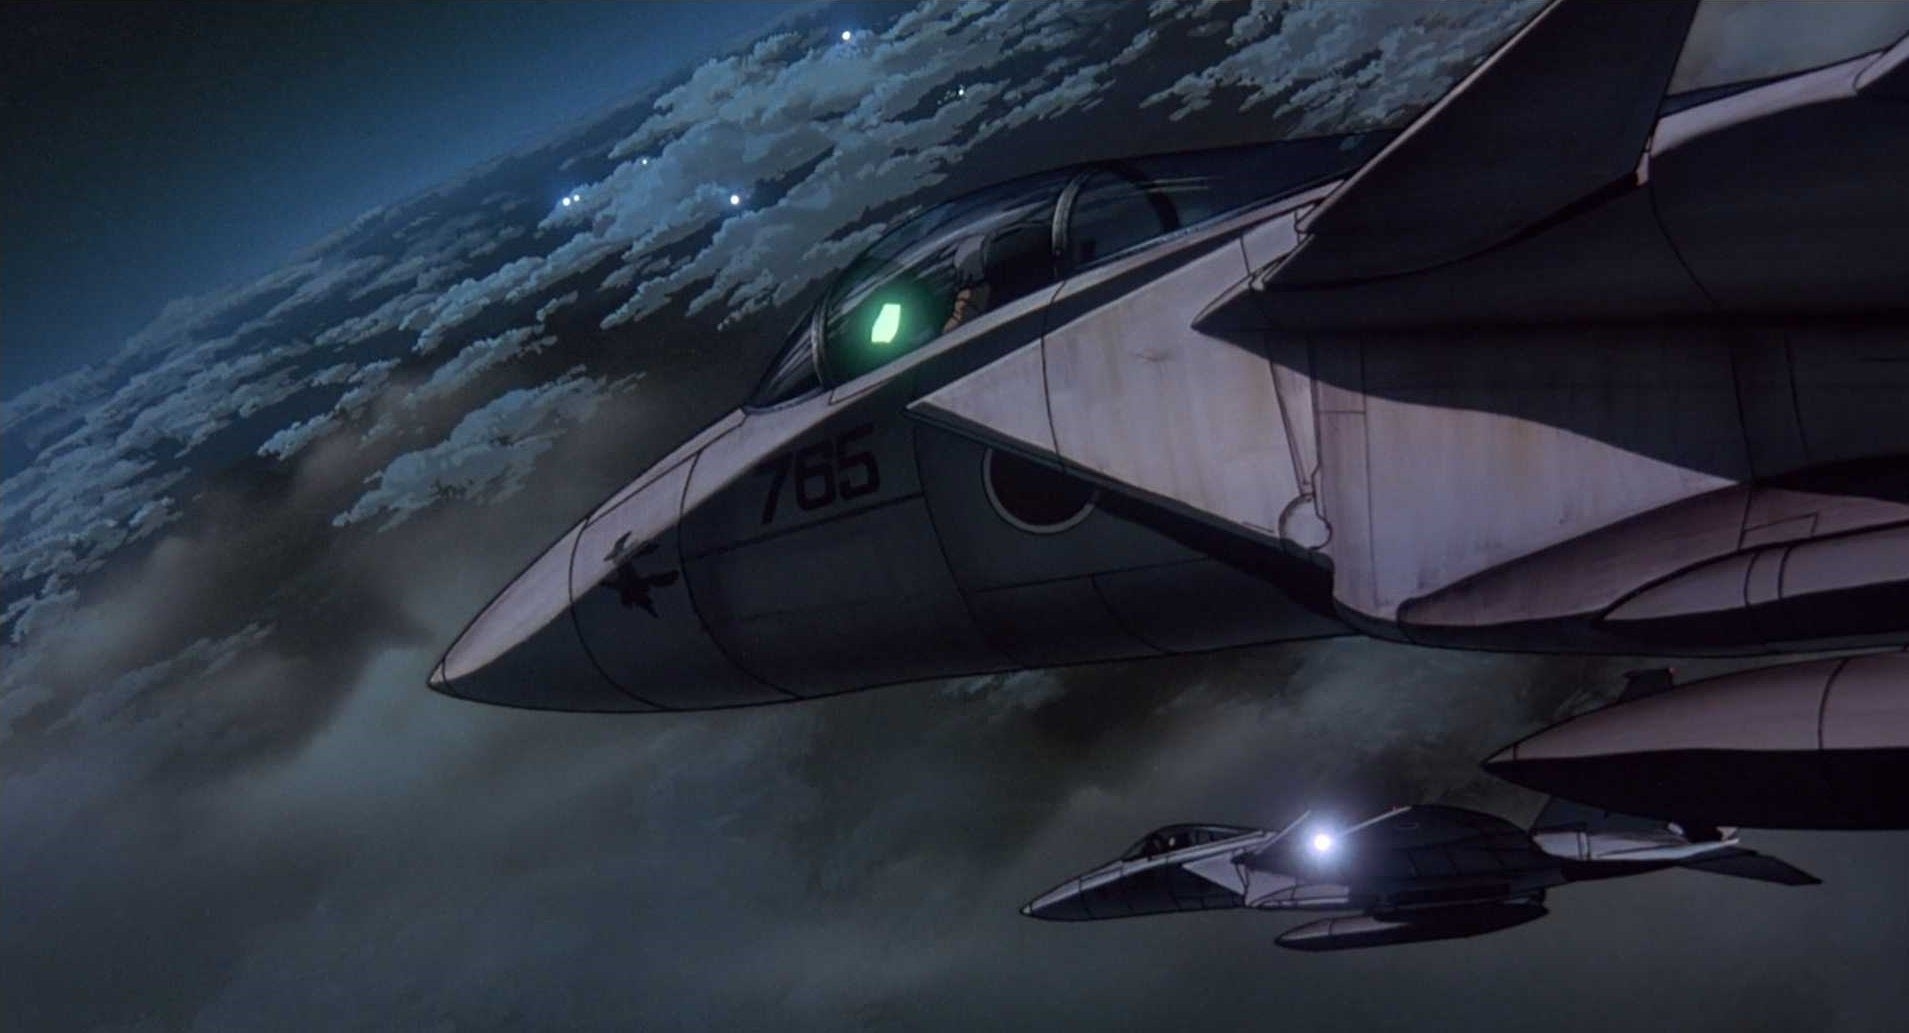 Patlabor 2: The Movie' has stunningly realistic aerial combat